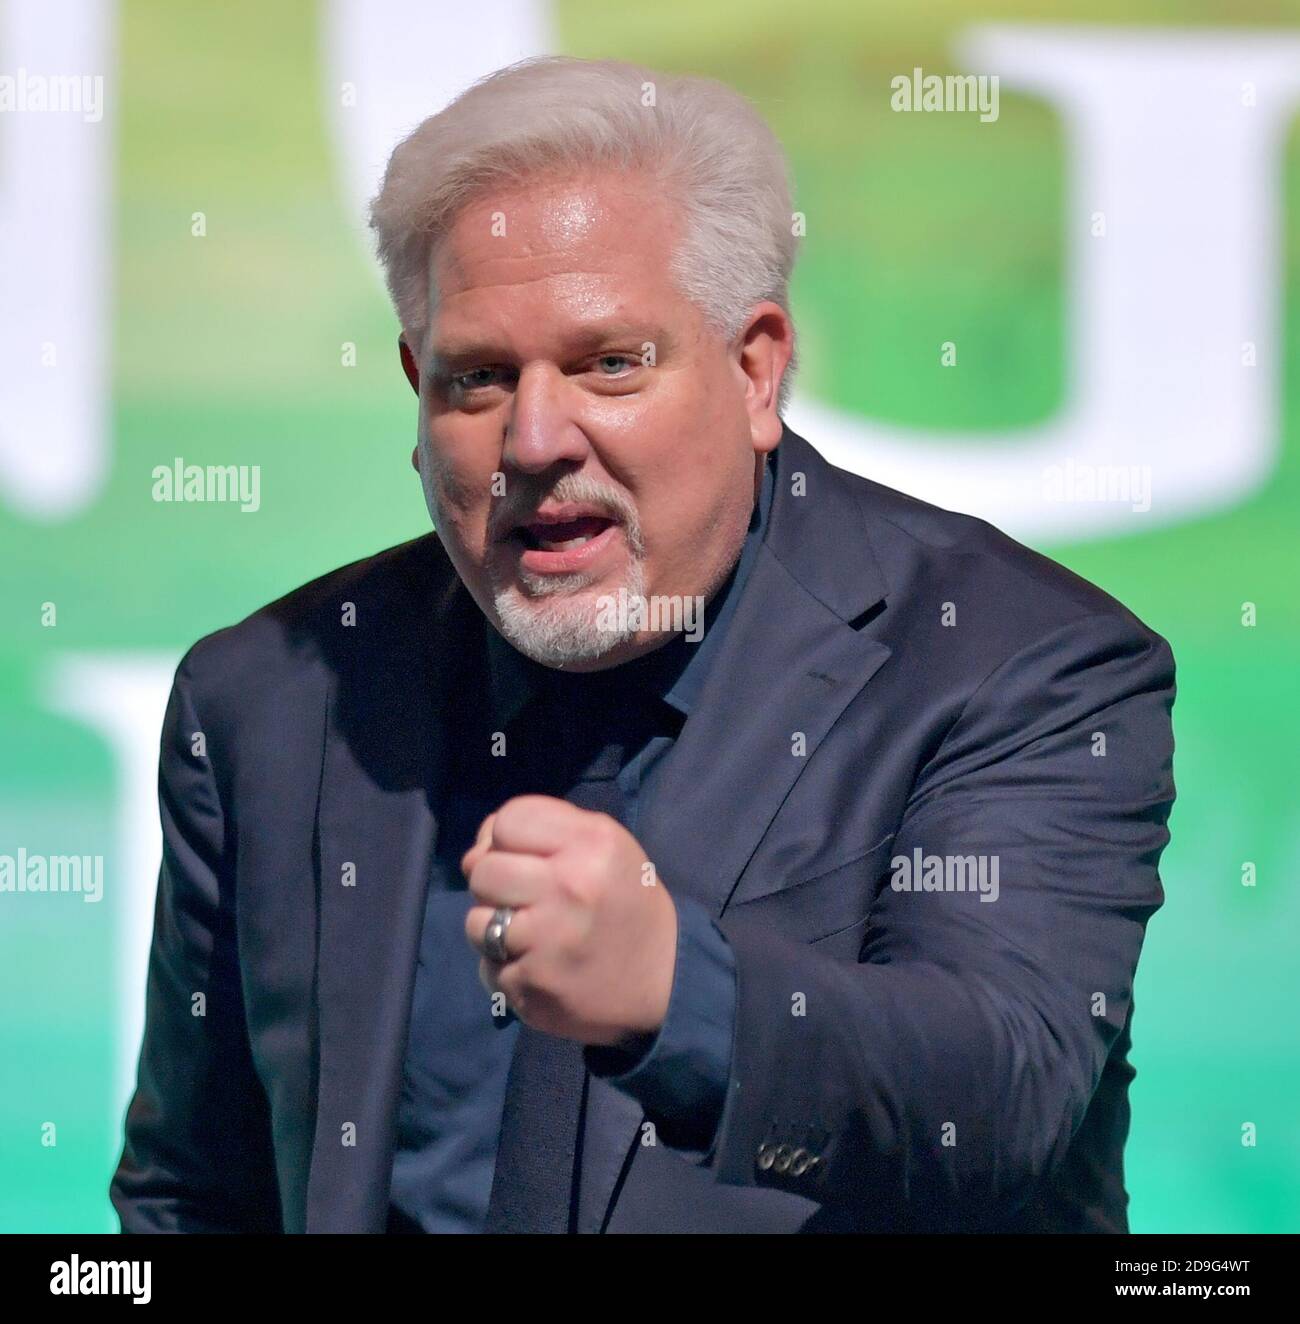 WEST PALM BEACH, FL - DECEMBER 19: Glenn Beck speaks at the 2019 Turning Point USA Student Action Summit - Day 1 at the Palm Beach County Convention Center on December 19, 2019 in West Palm Beach, Florida.  People:  Glenn Beck Credit: Hoo-me / MediaPunch Stock Photo